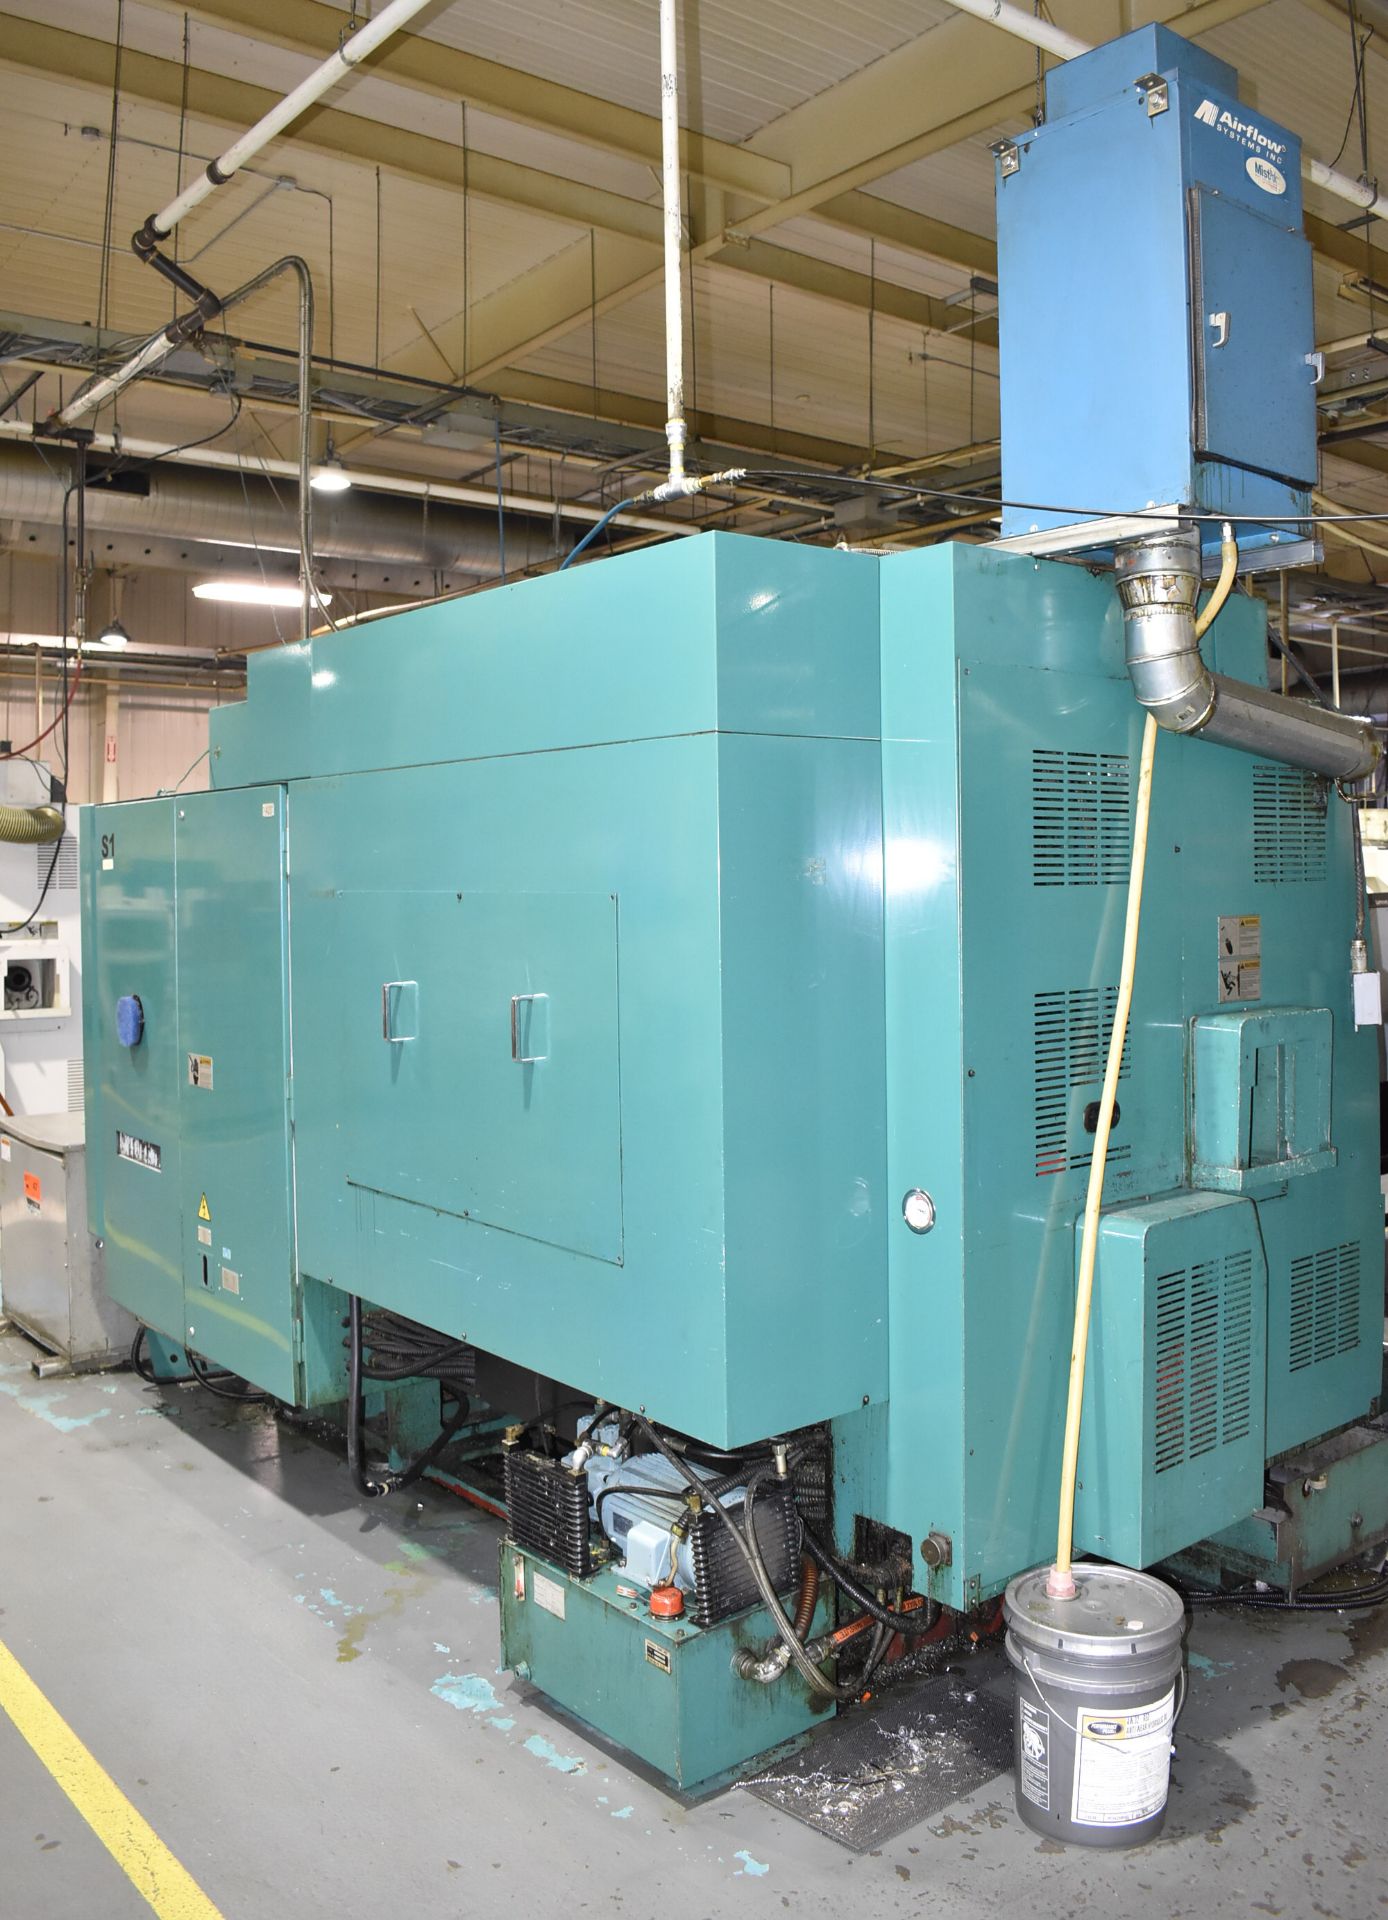 NAKAMURA-TOME (2006) WT-250 MULTI-AXIS OPPOSED SPINDLE AND TWIN TURRET CNC MULTI-TASKING CENTER WITH - Image 10 of 14